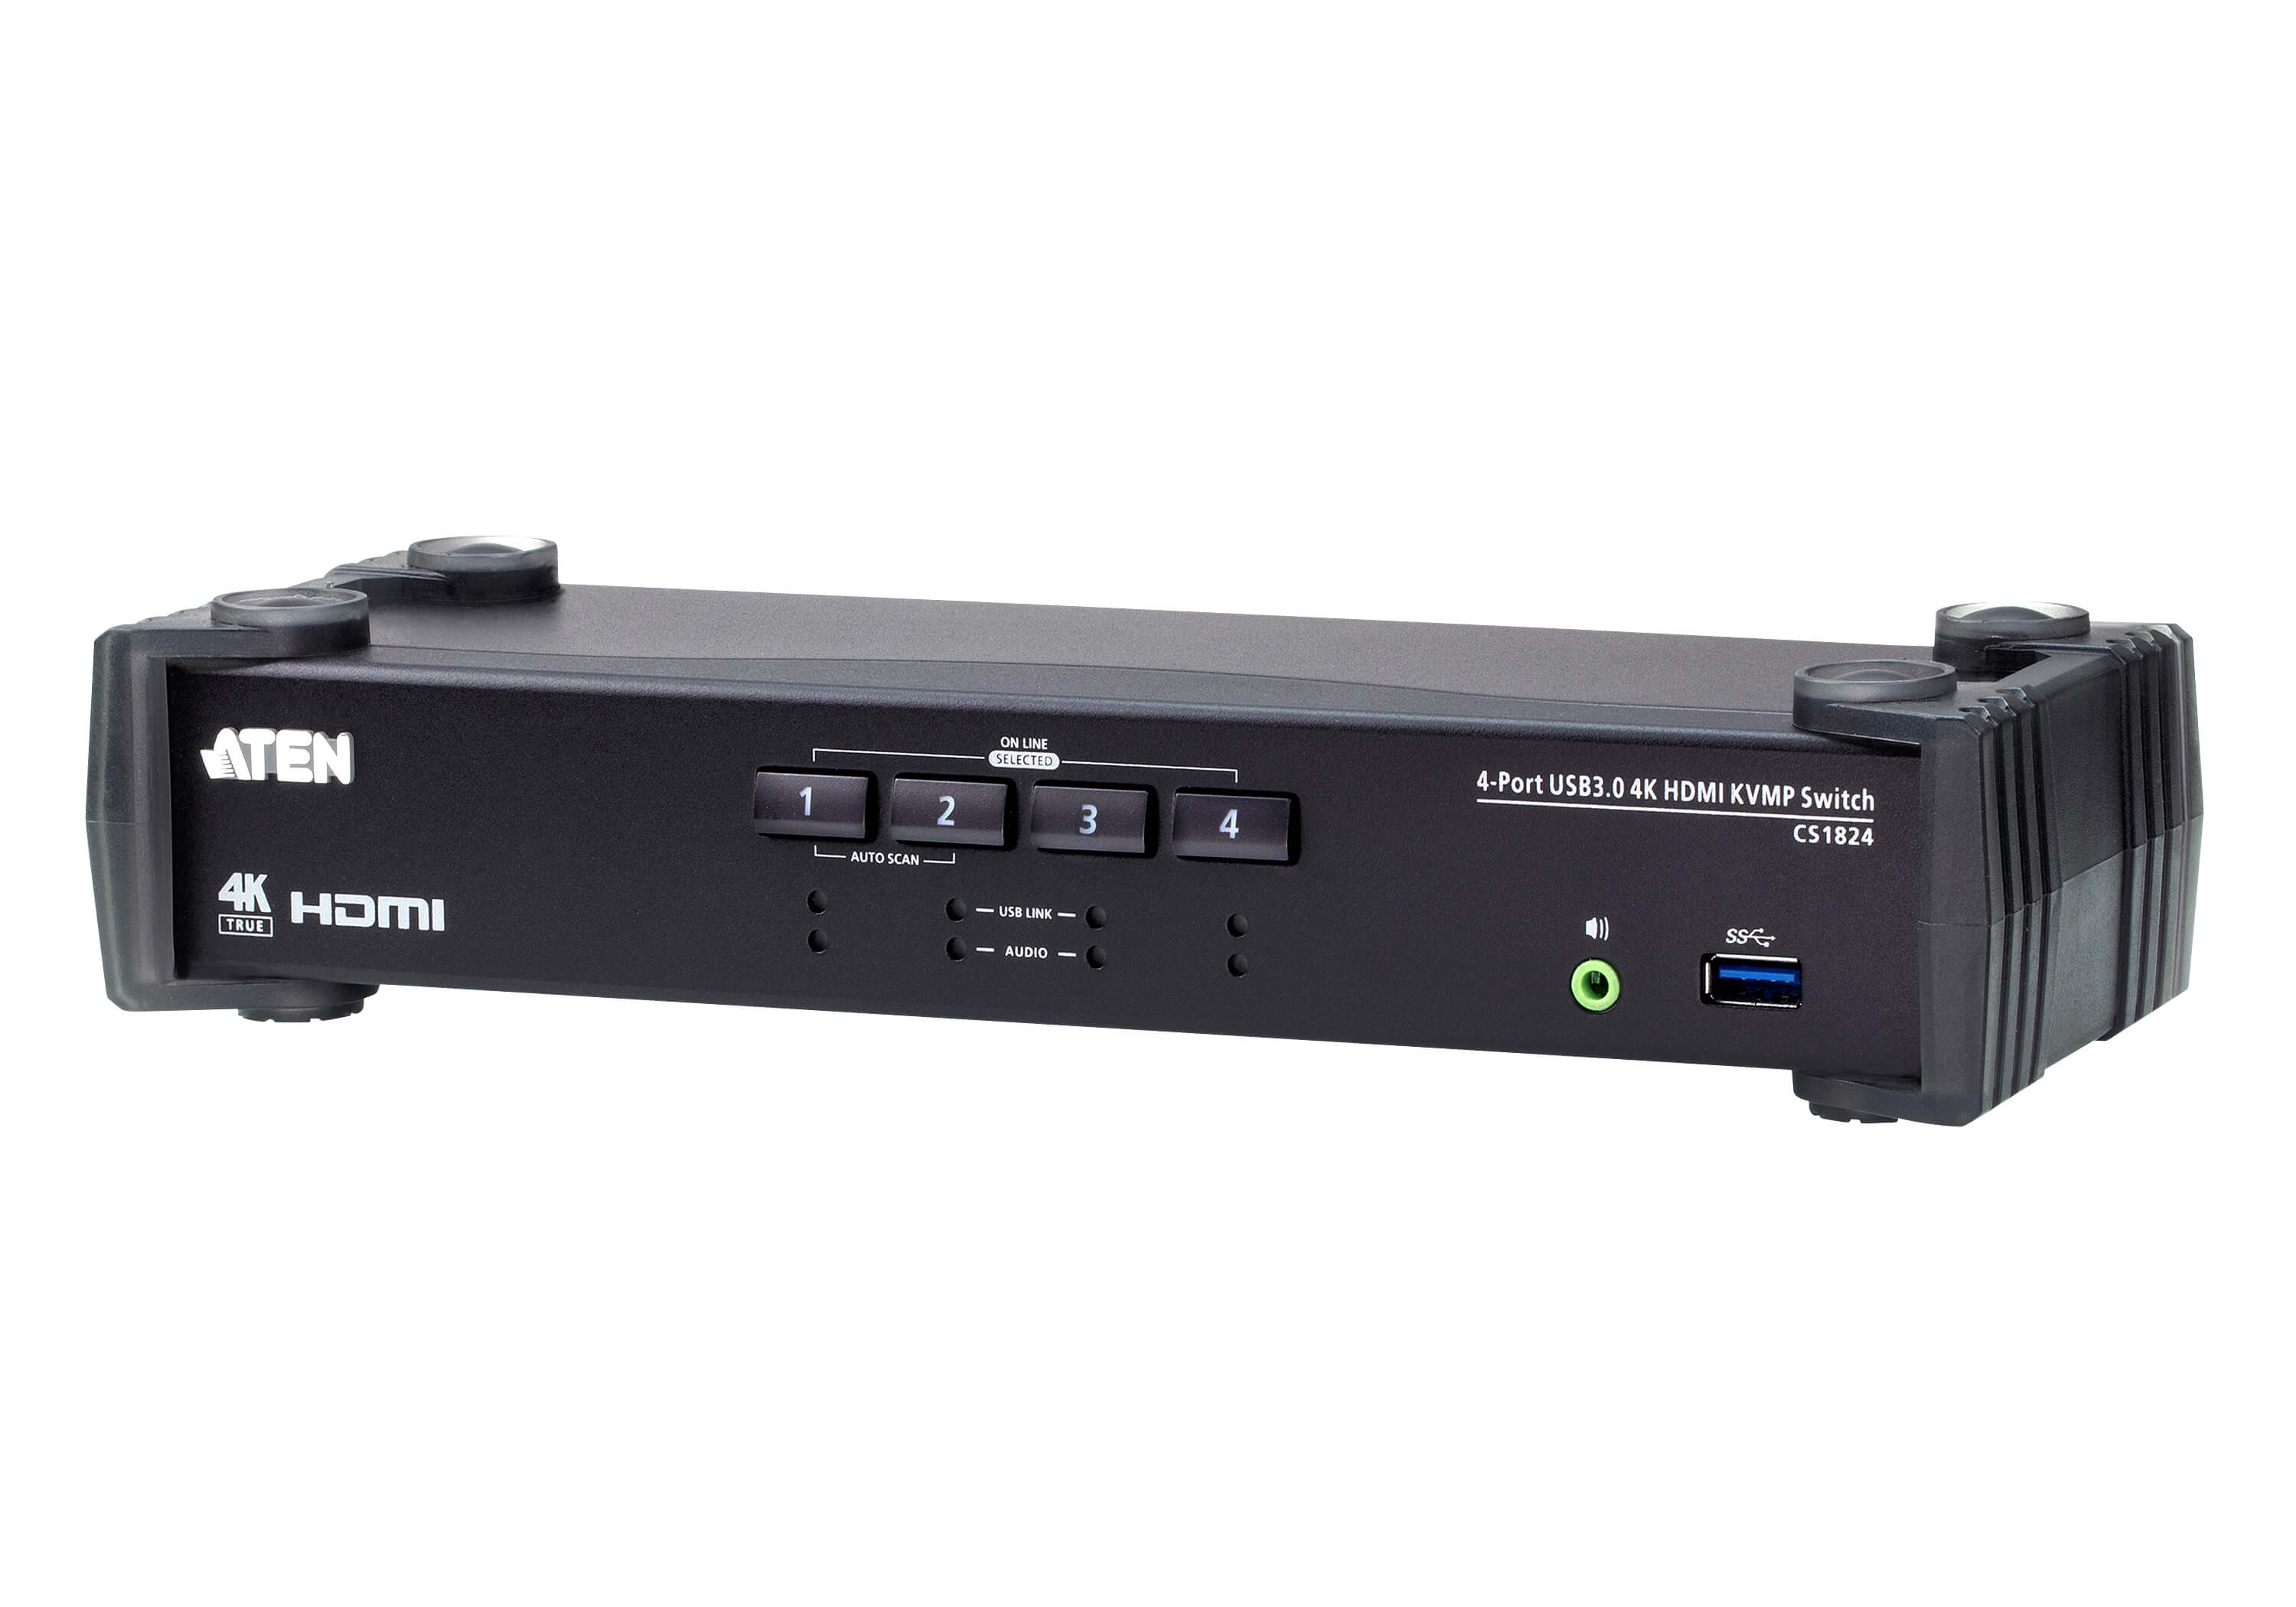 Aten Desktop KVMP Switch 4 Port Single Display 4k HDMI w/ audio mixer mode, Cables Included, Selection Via Front Panel